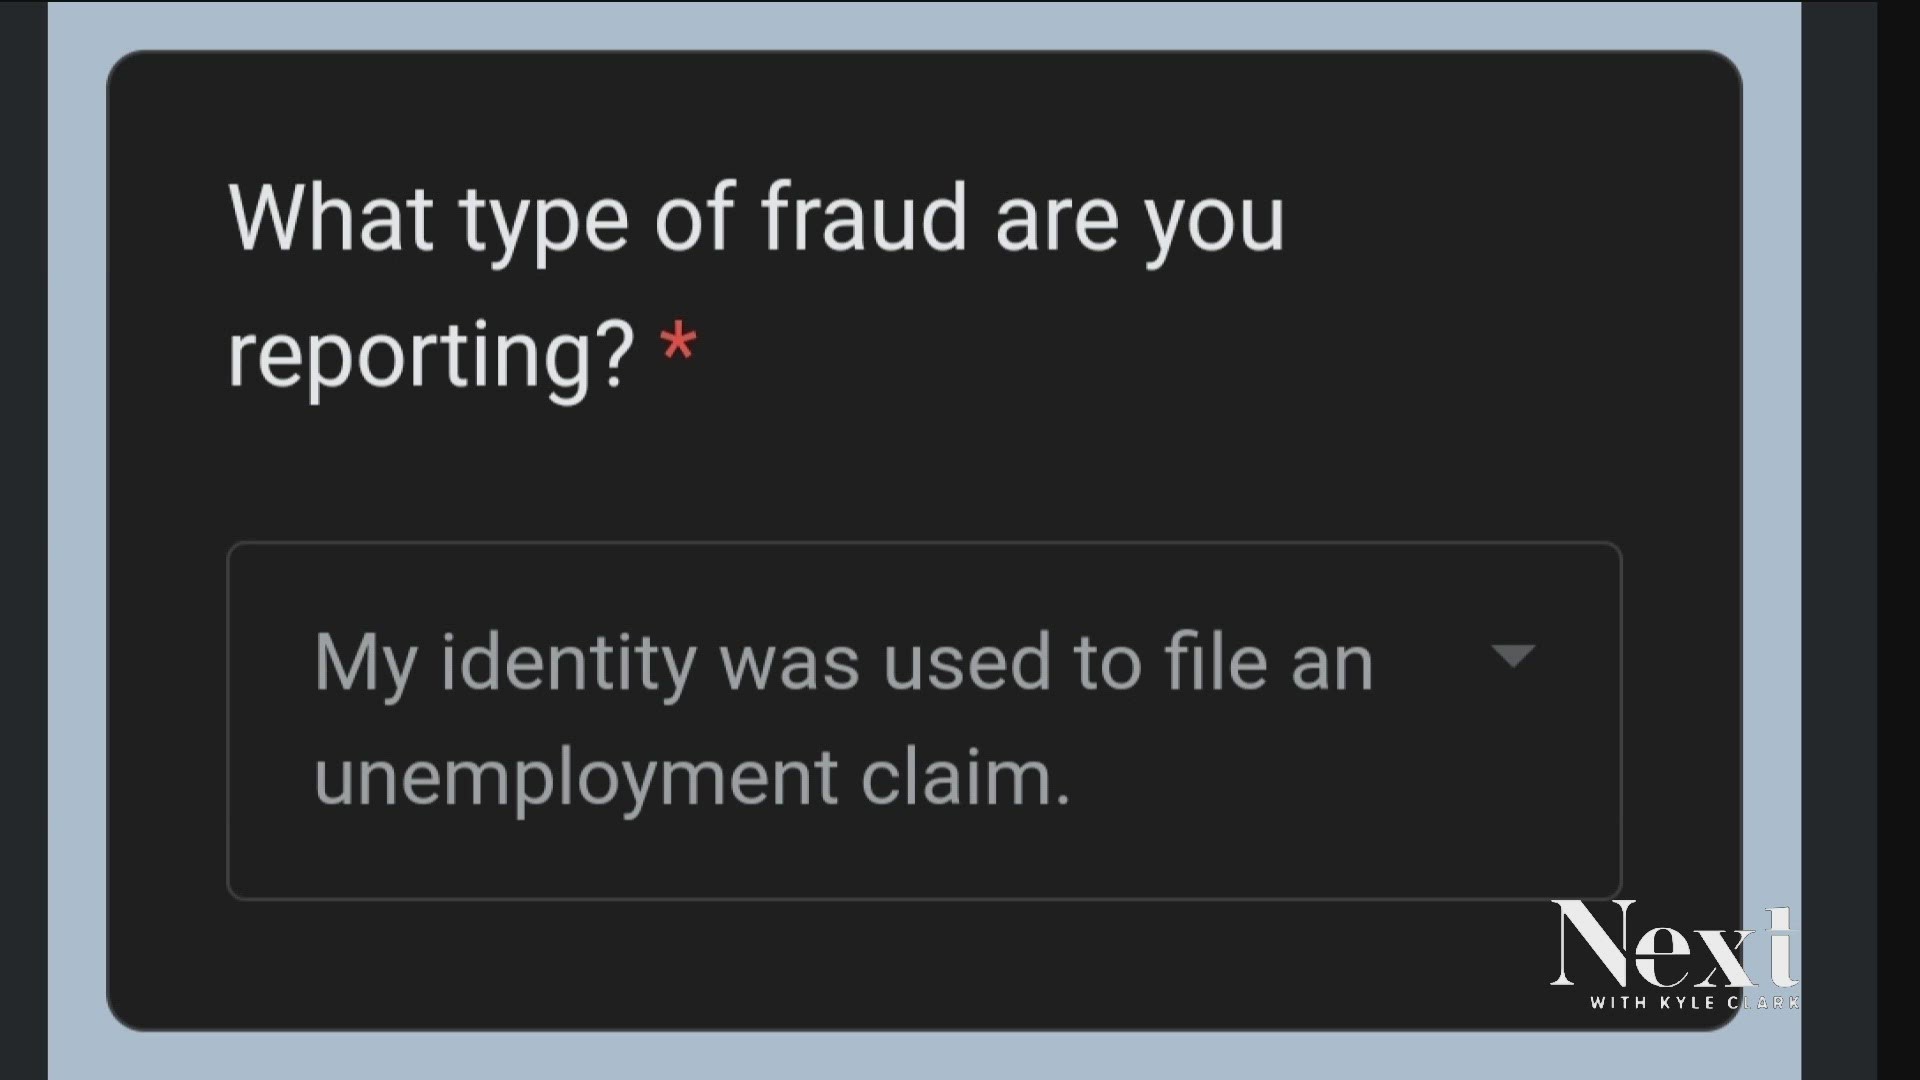 For two Coloradans who reported unemployment fraud, no good deed goes unpunished. Now, they're having trouble getting their real claims filed with the state.